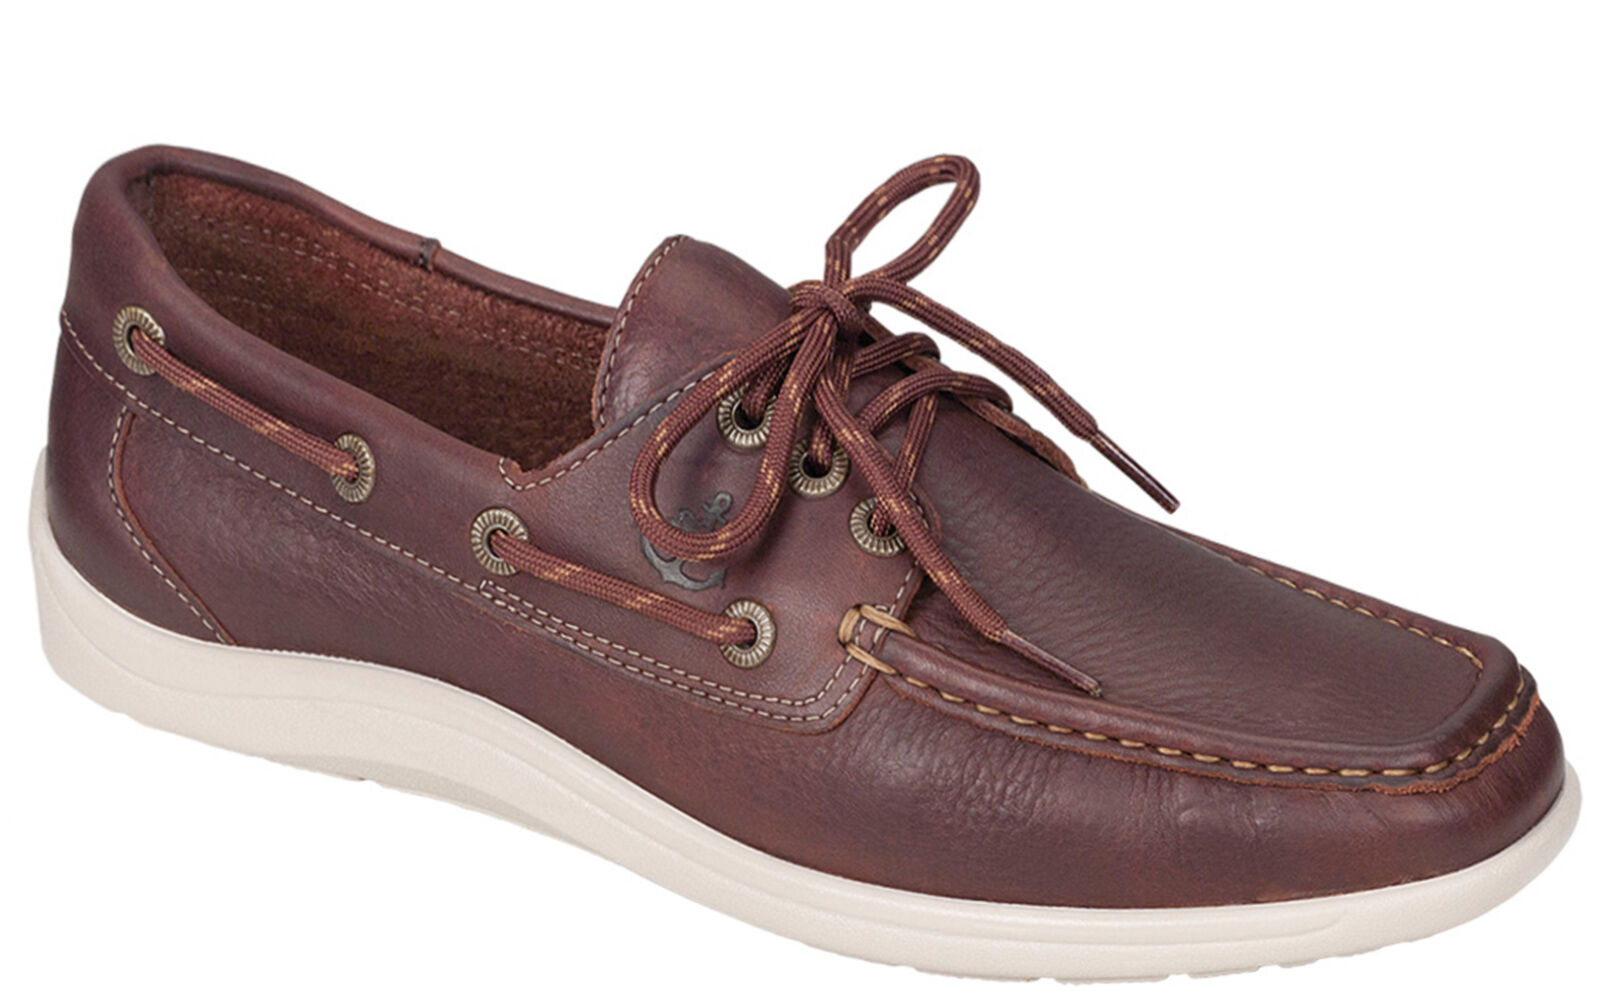 Beefed-Up Boat Shoes Are the Wave Right Now | GQ